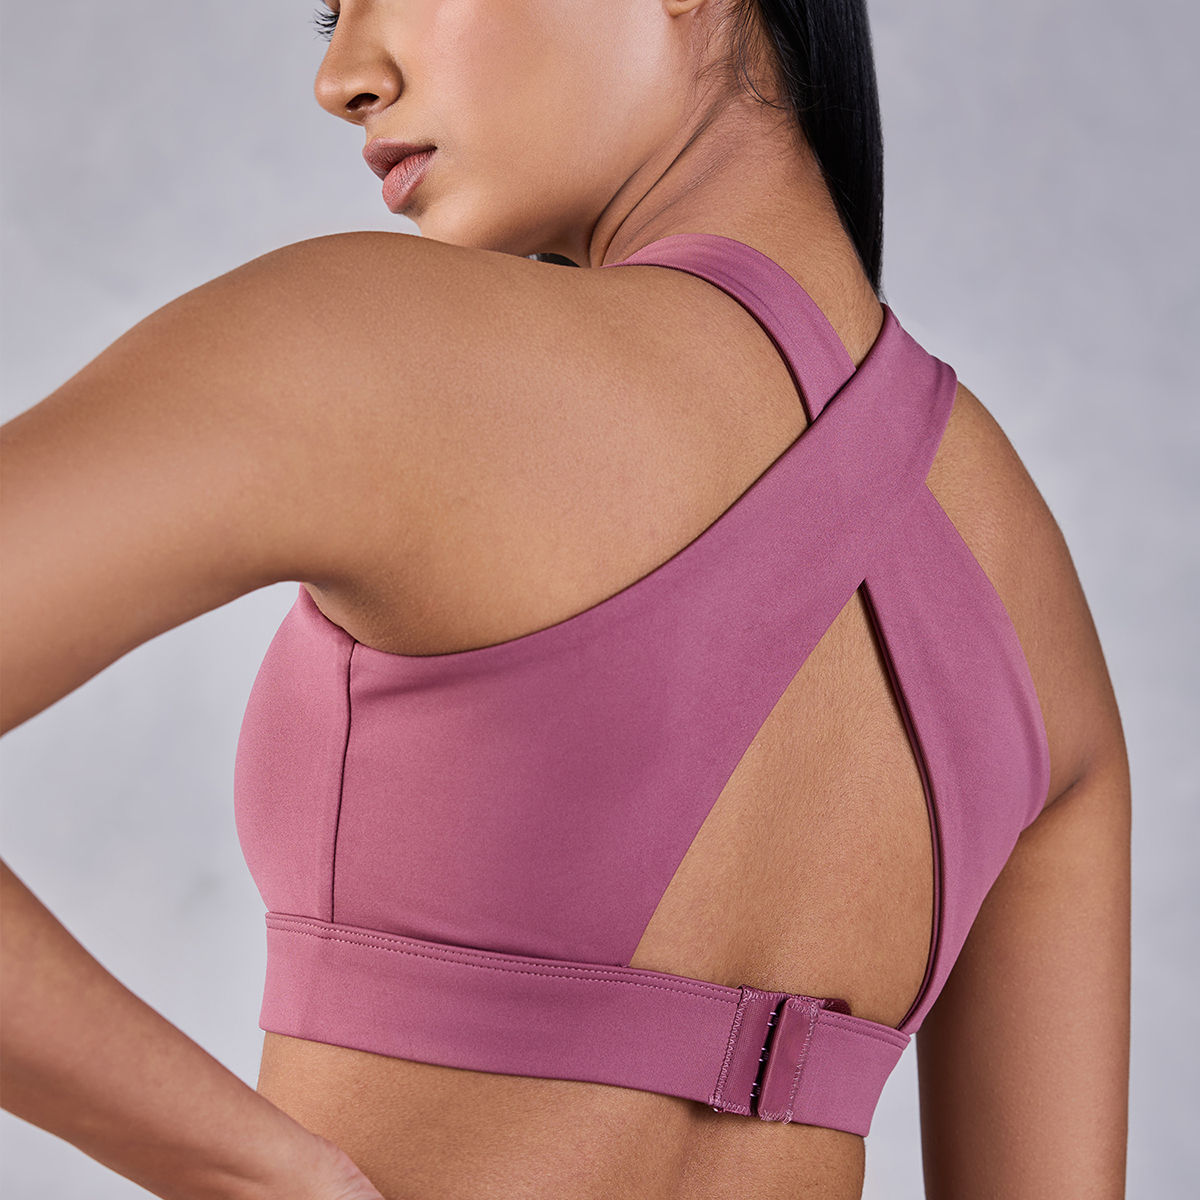 Buy Kica High Impact Crostini Sports Bra in Second SKN Fabric with